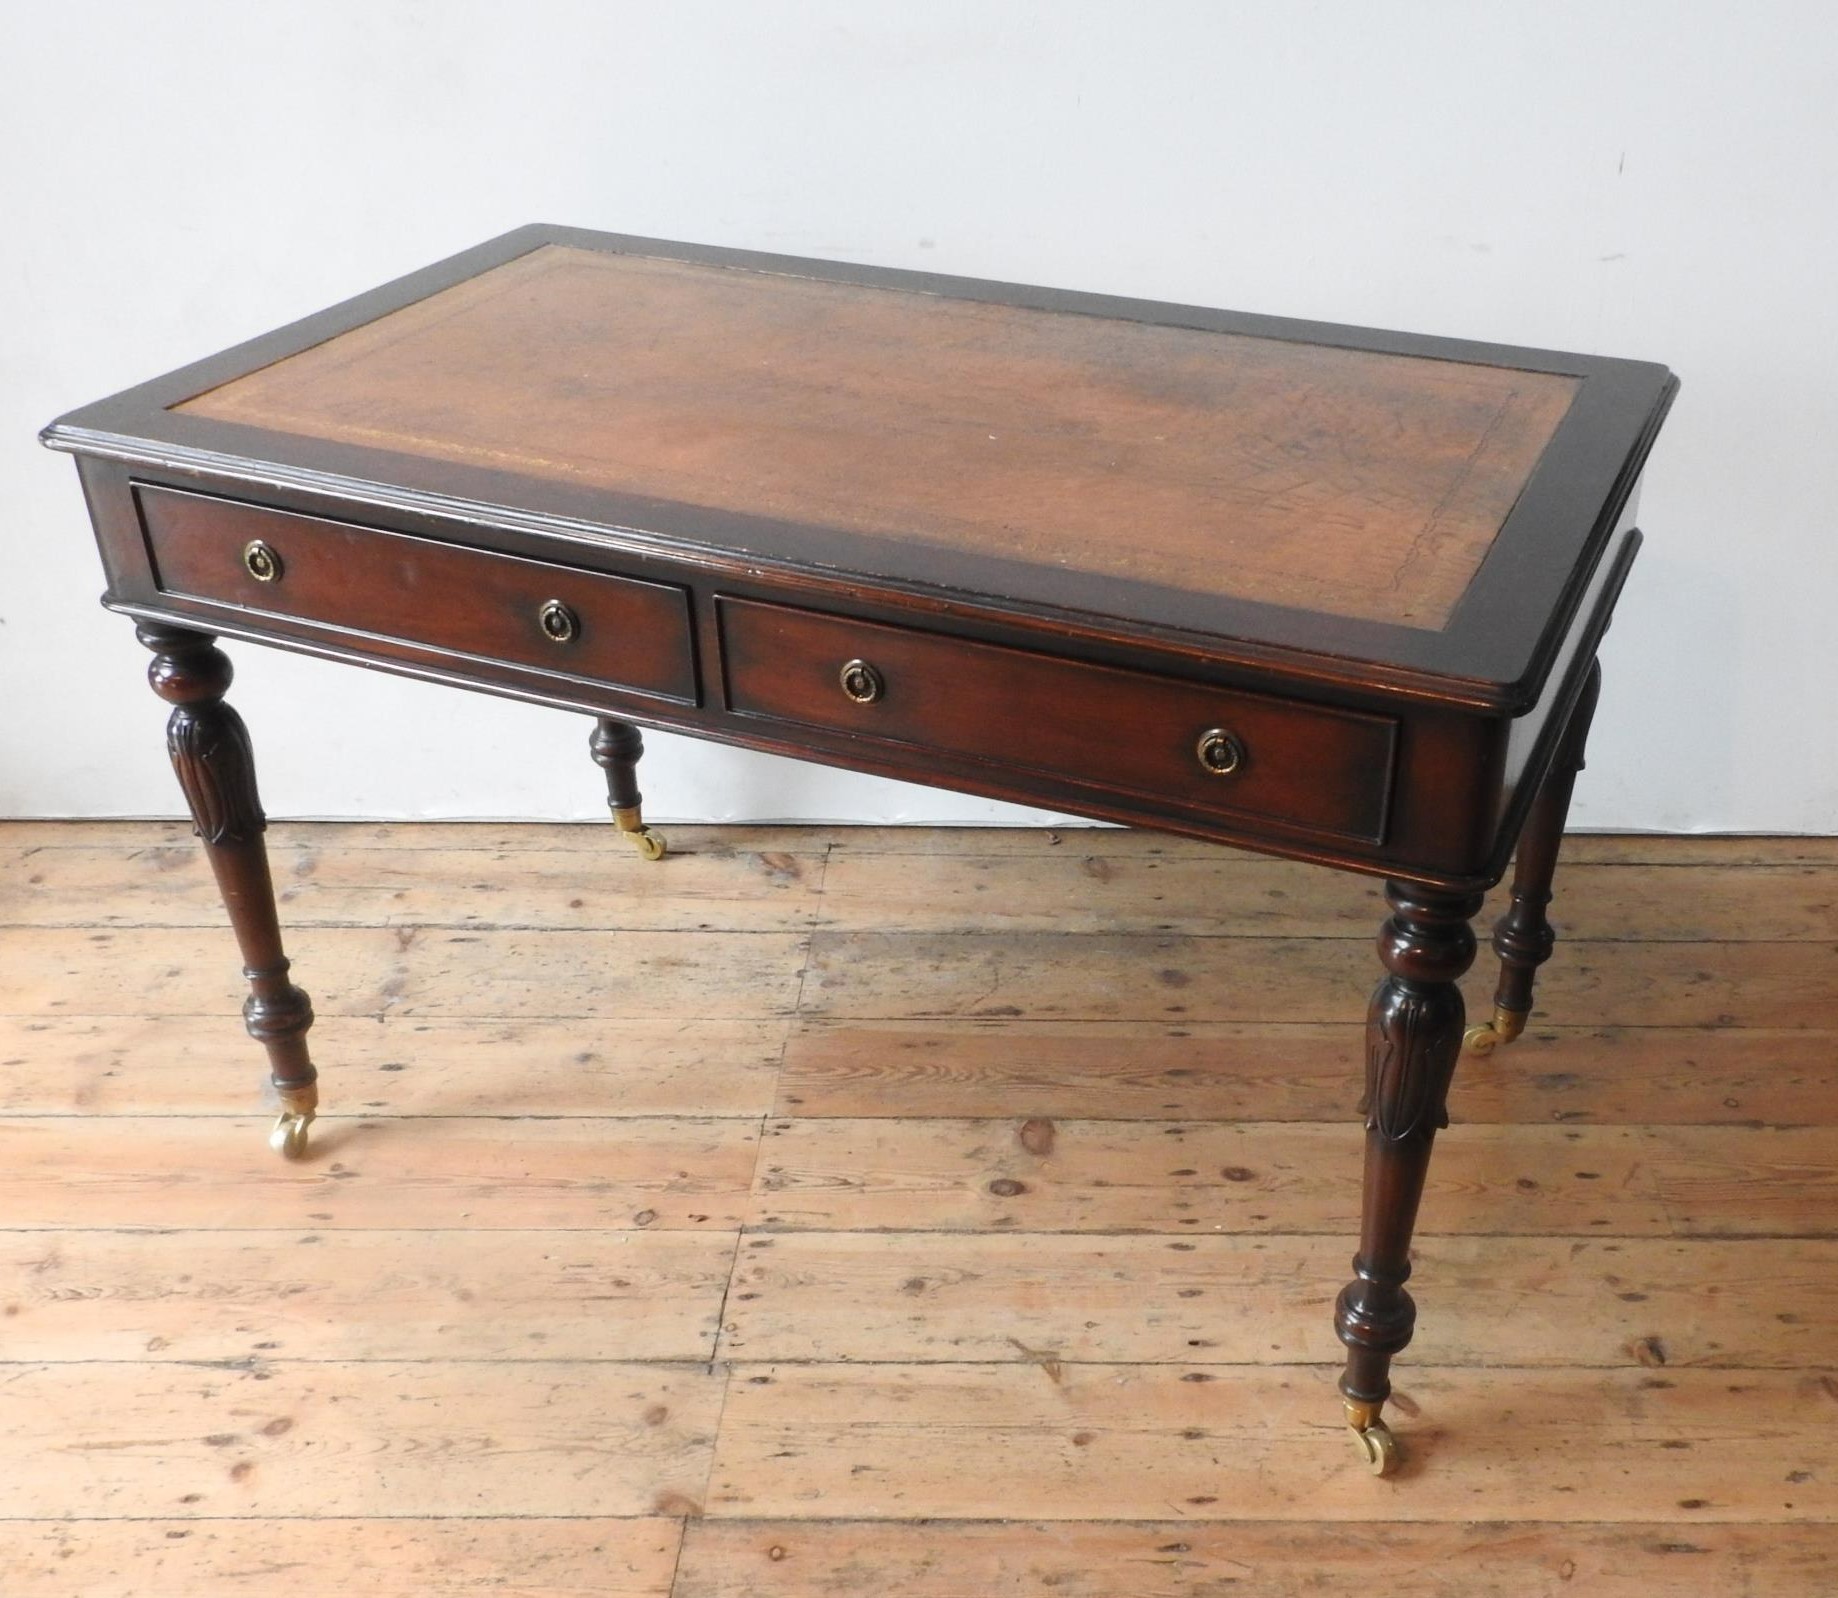 A 20TH CENTURY MAHOGANY REGENCY STYLE LIBRARY TABLE, with leather top, the legs carved with tulip - Image 2 of 3